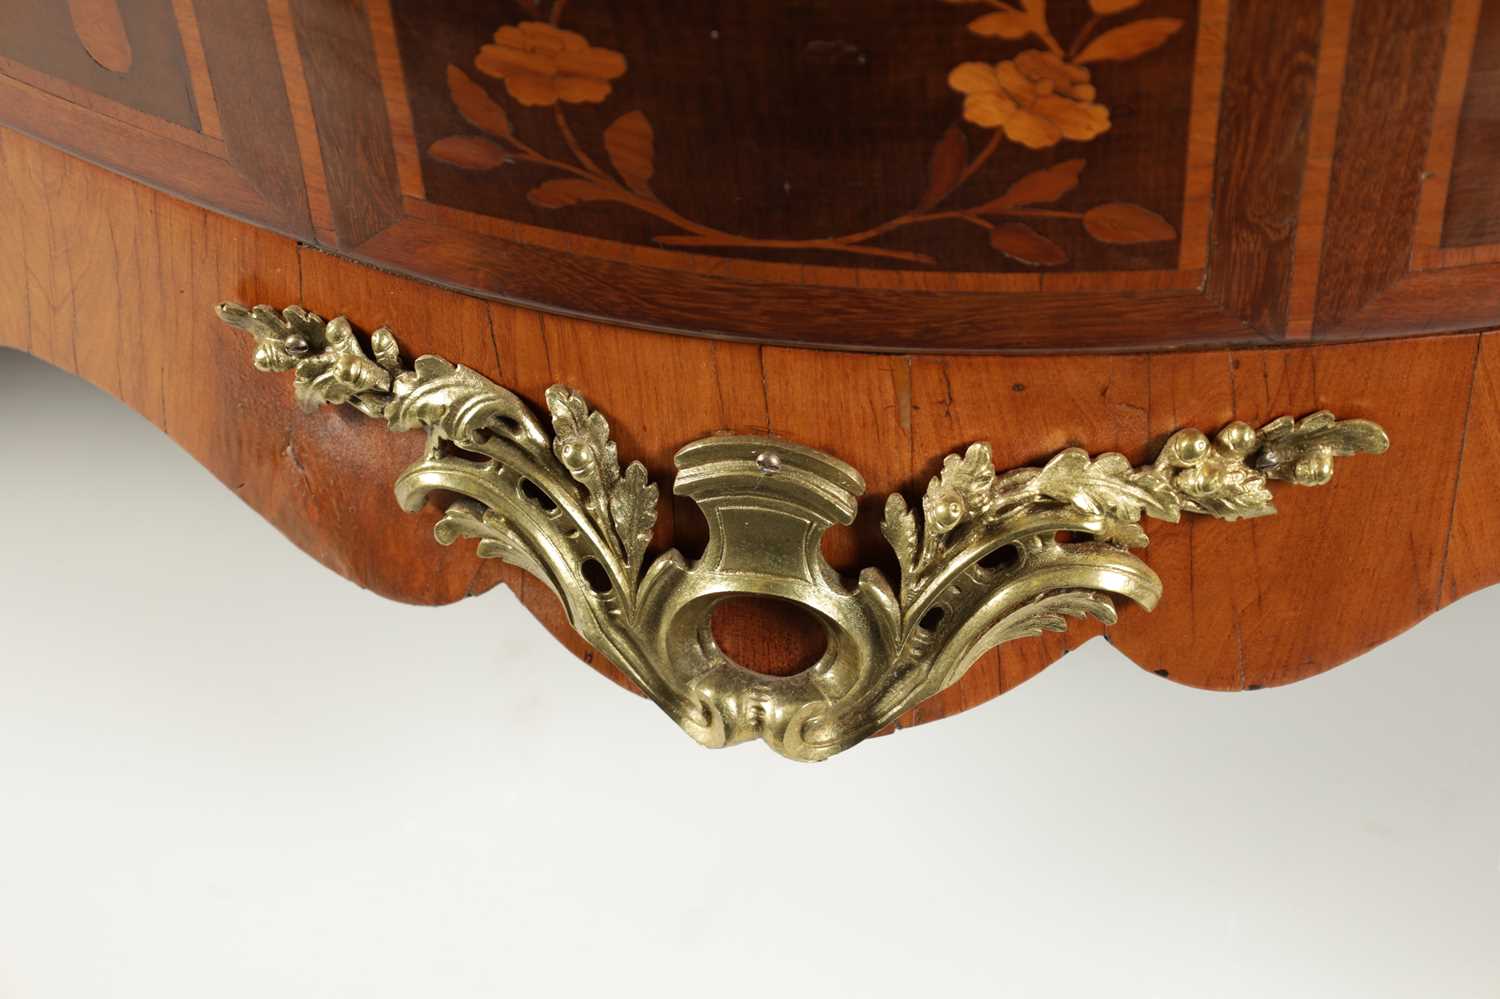 A FINE GEORGE II ENGLISH MARQUETRY COMMODE IN THE MANNER OF HENRY HILL - Image 18 of 23